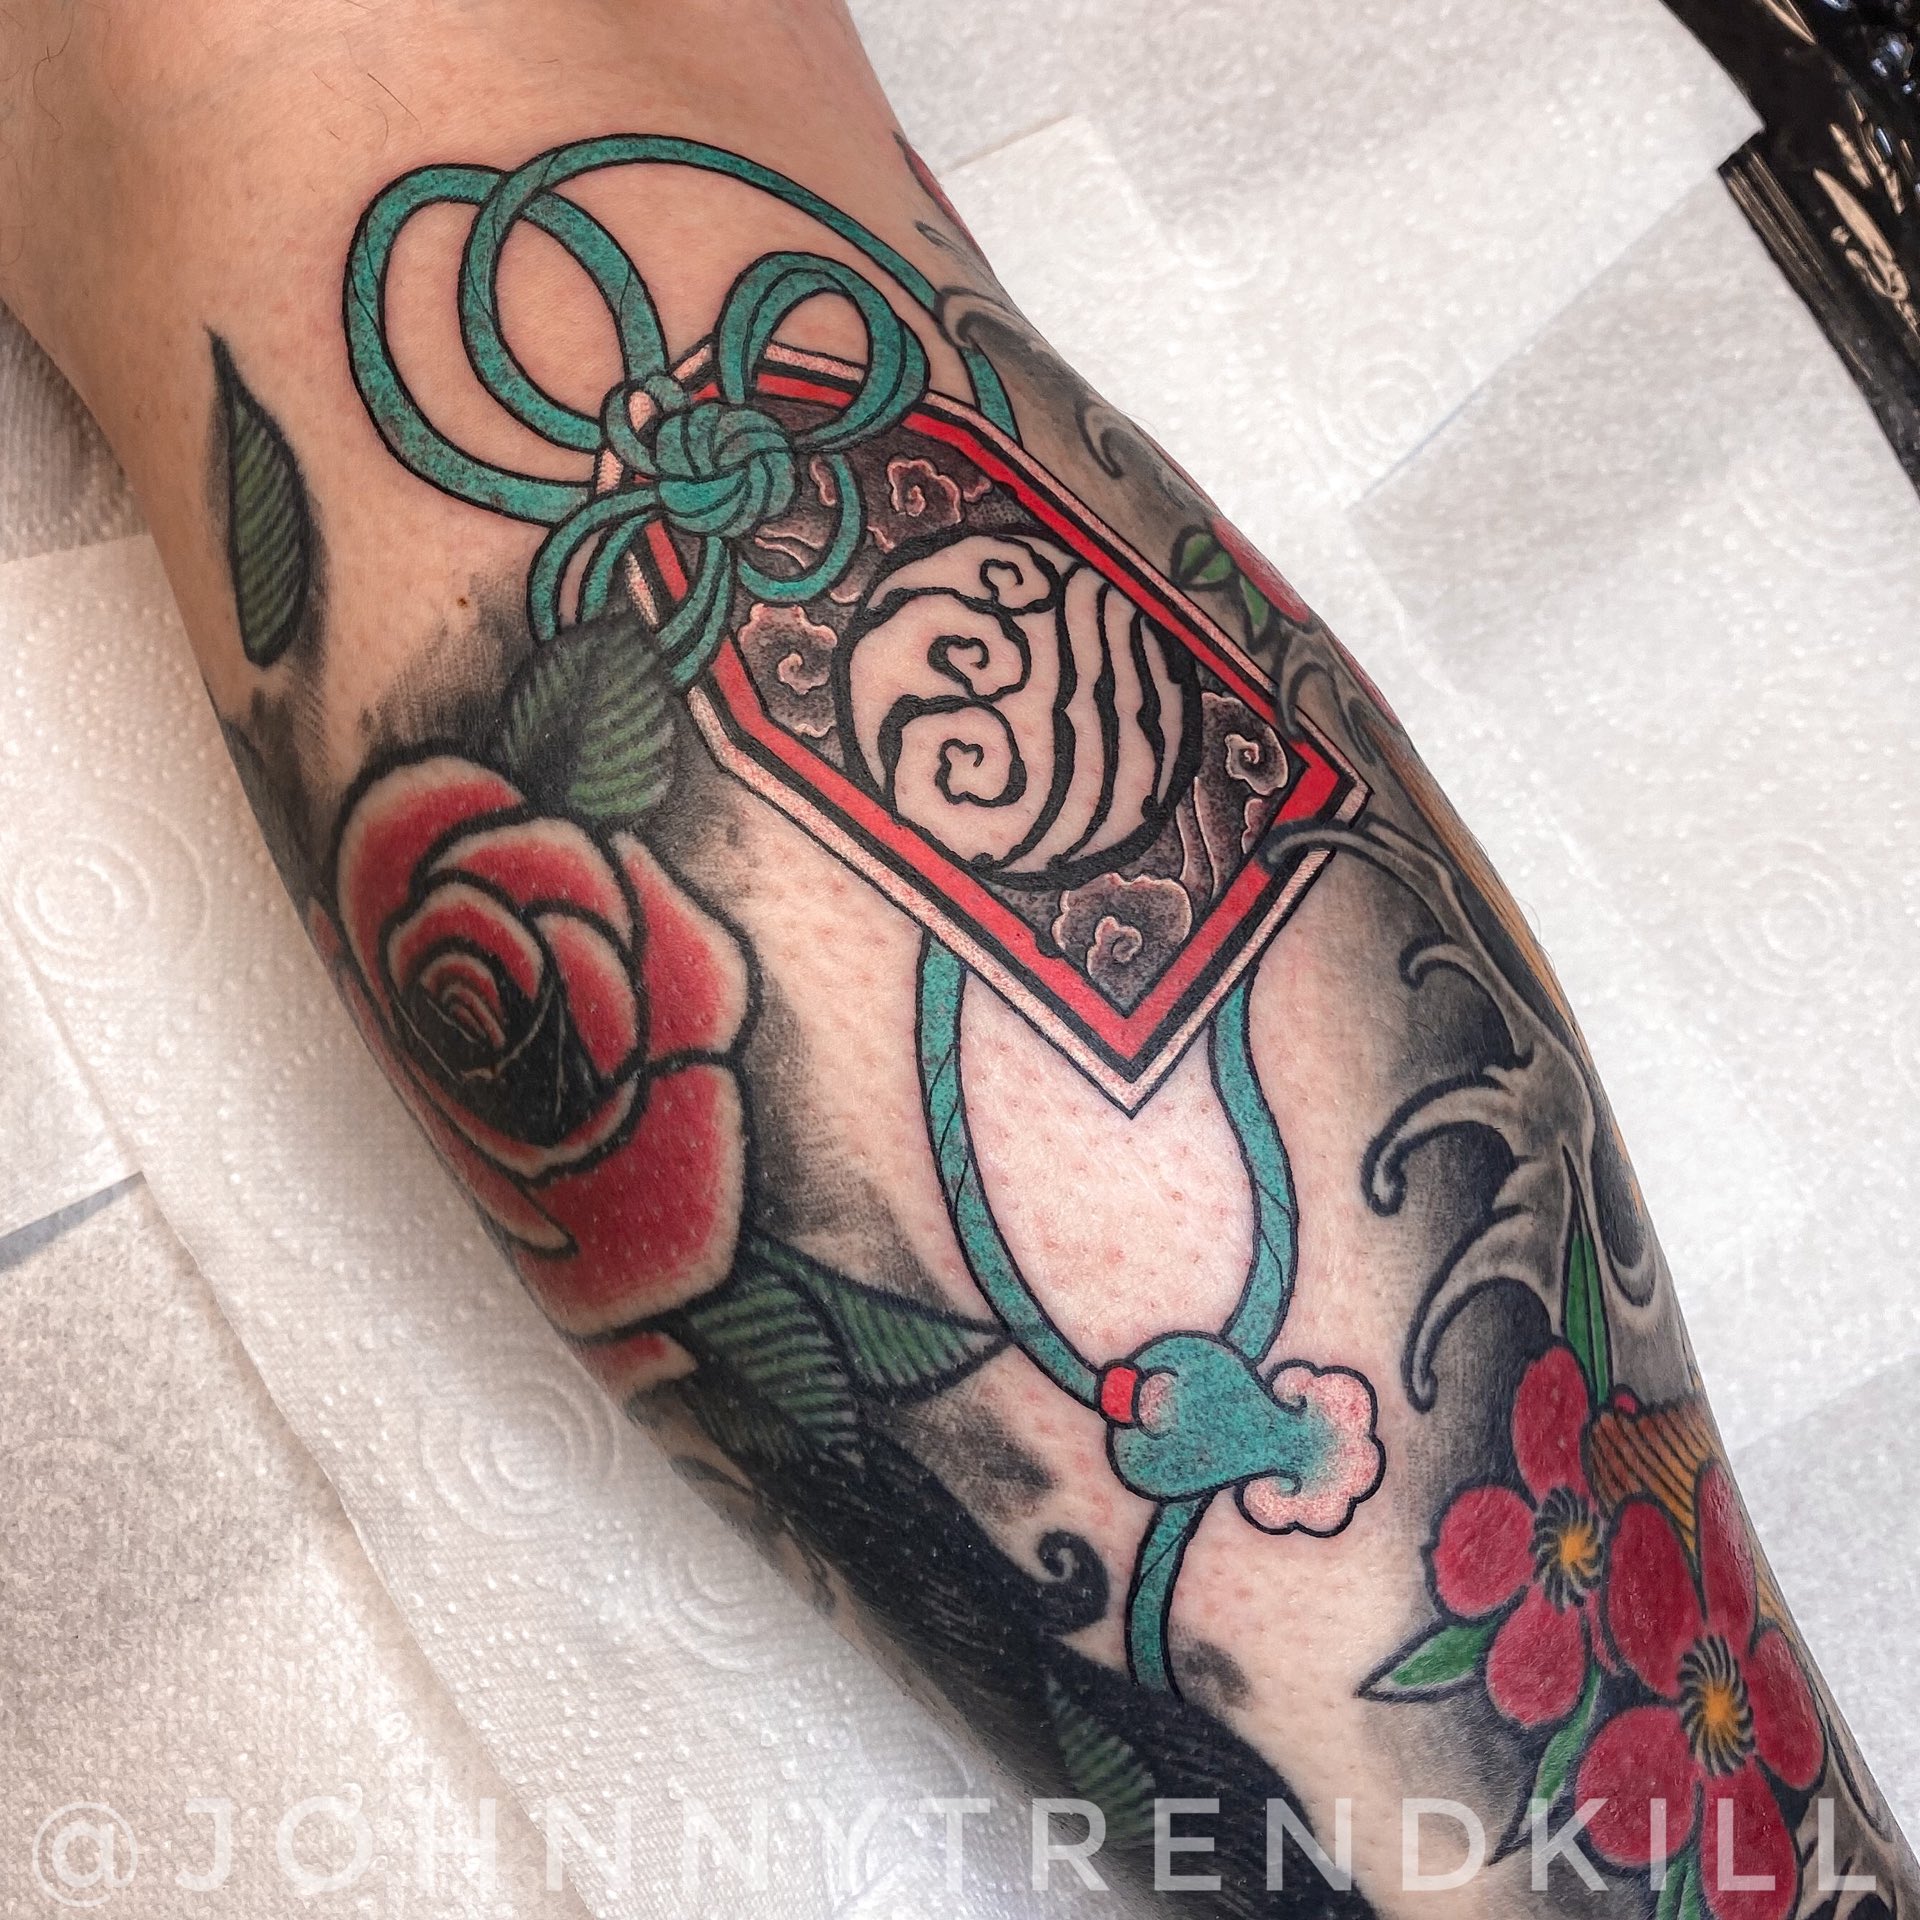 Firefly Tattoo - Little skeleton key and roses from Laura. | Facebook